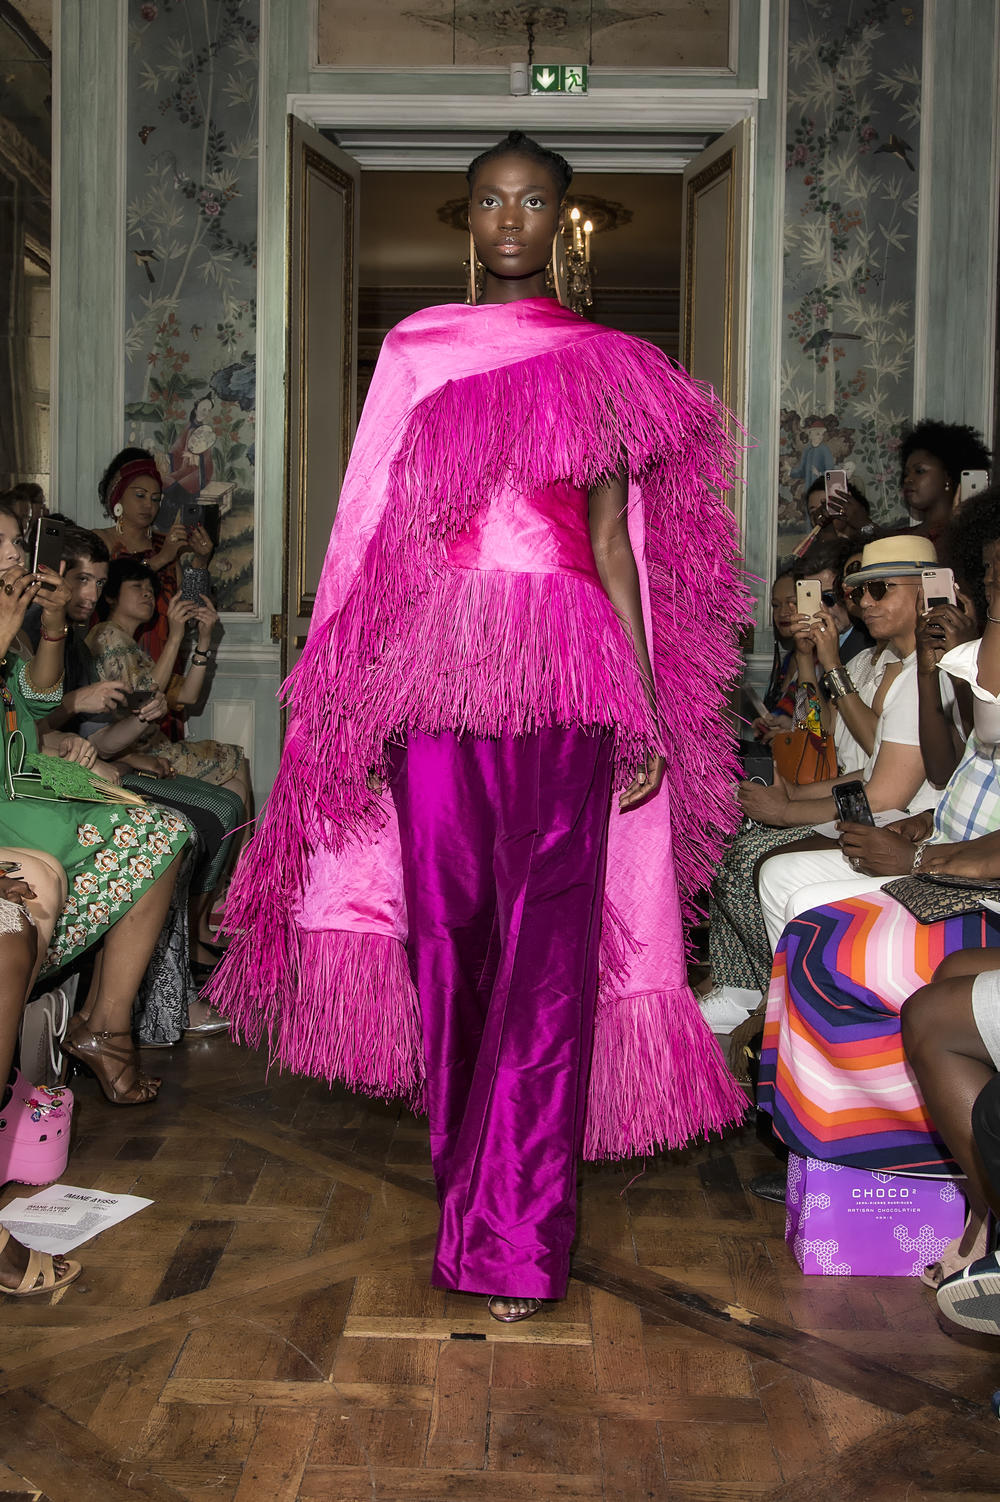 This garment from Imane Ayissi's Mbeuk Idourrou collection is pretty in pink. Ayissi, who's from Cameroon, is the first Black designer from sub-Saharan African to be included in the annual calendar of haute couture fashion shows in Paris.